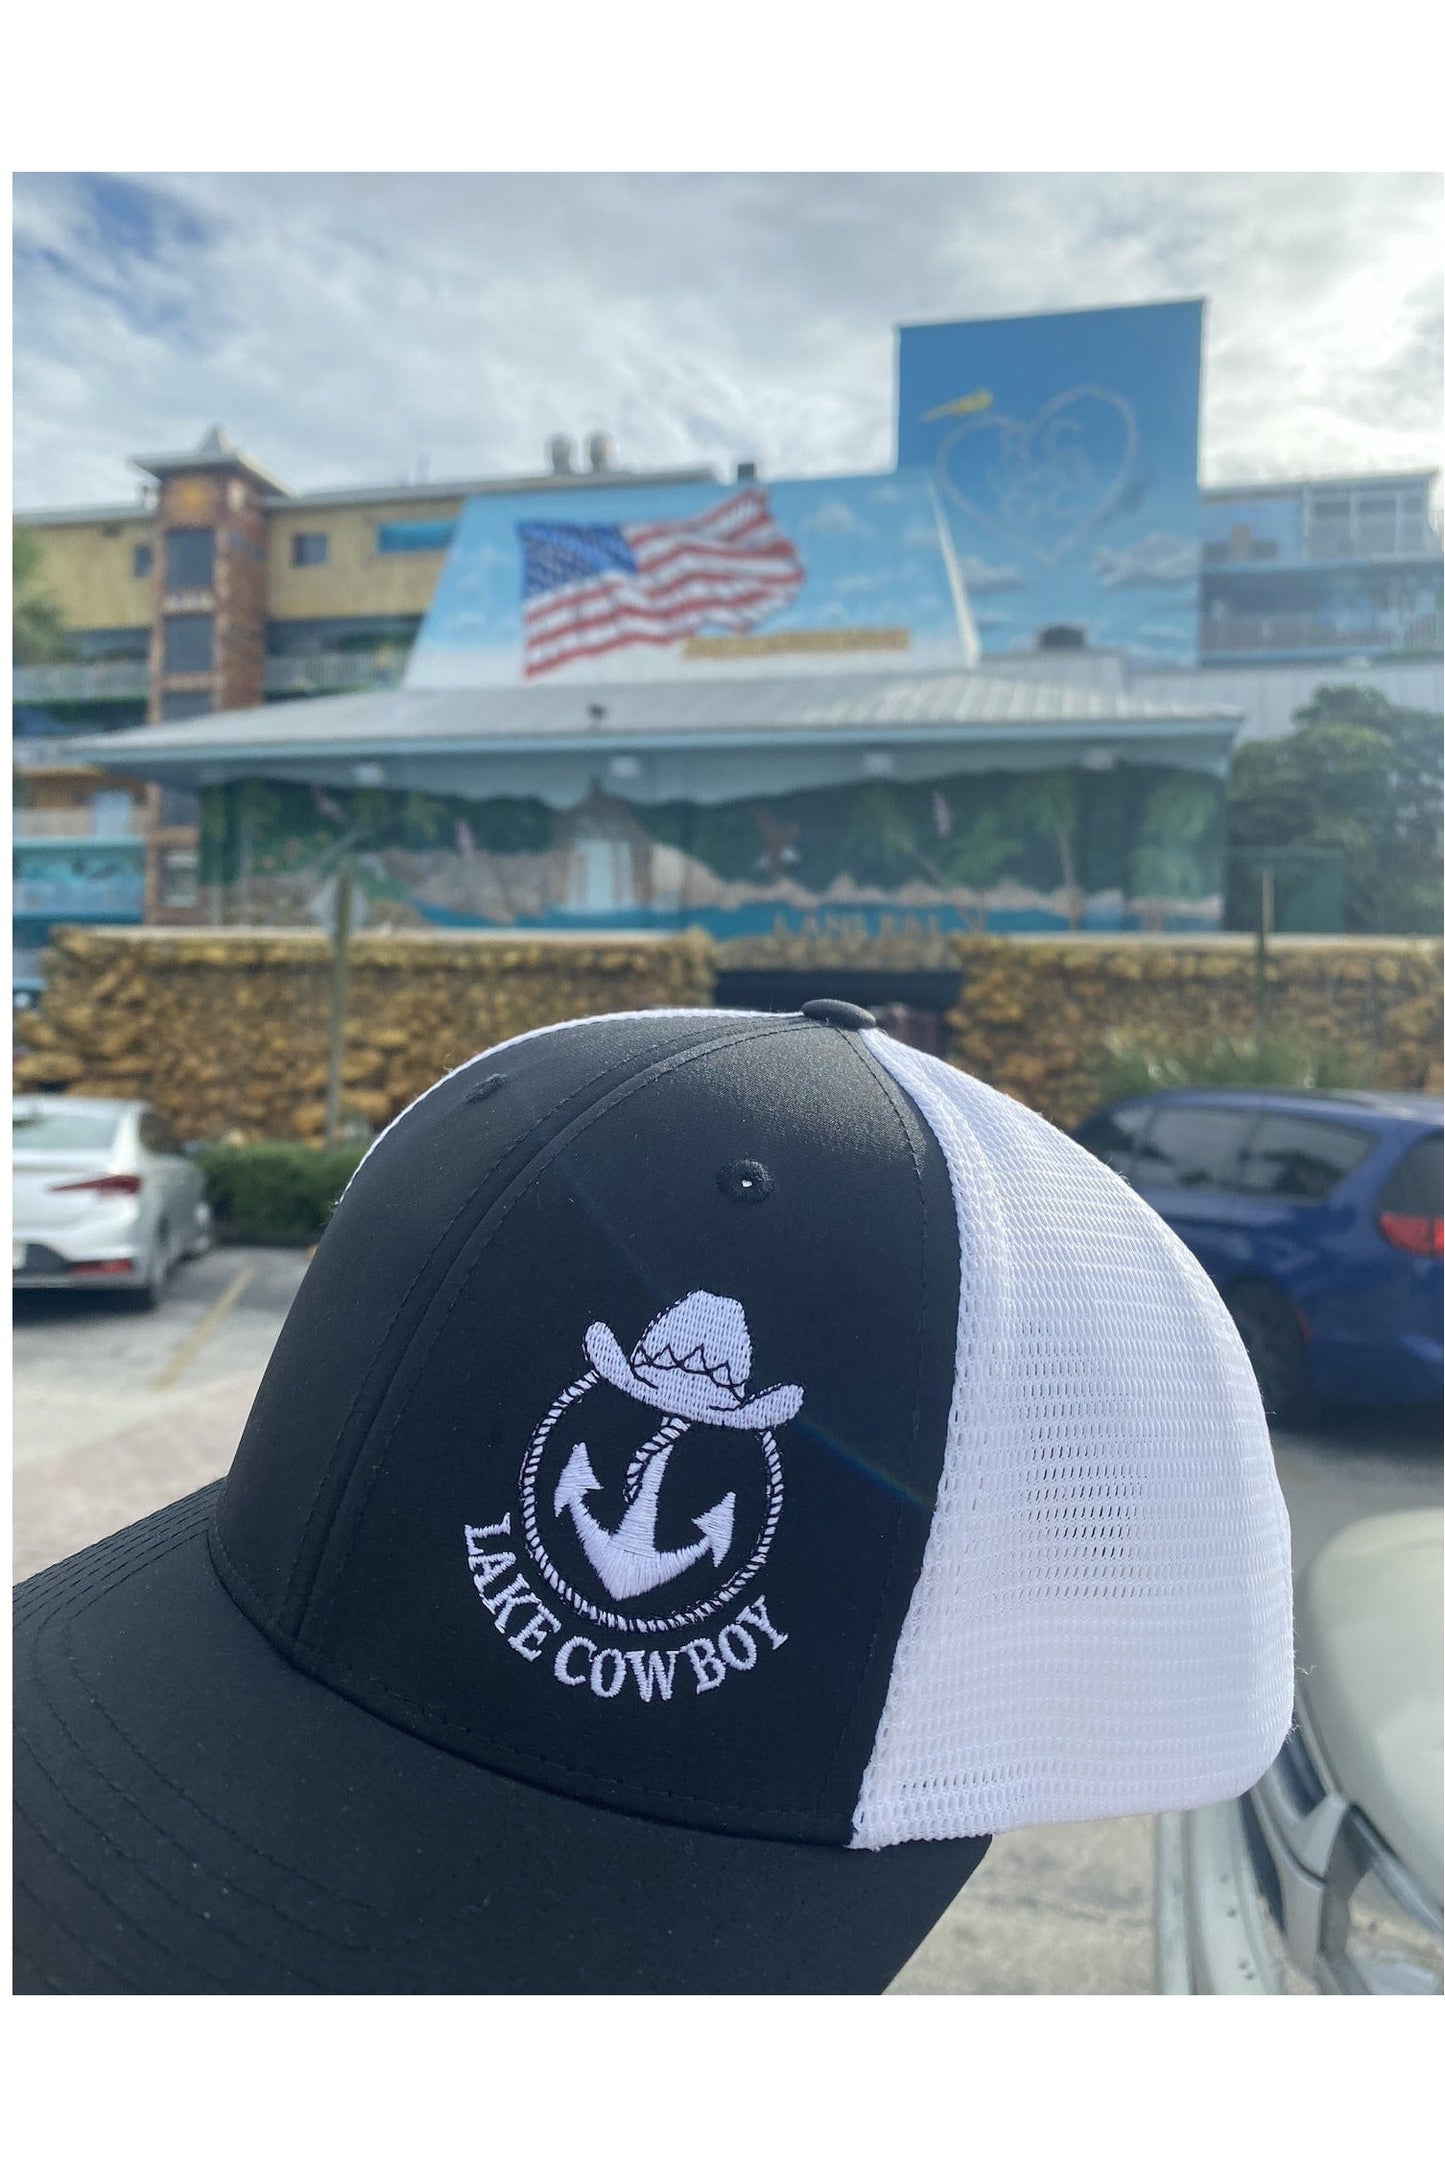 Photo of a Lake Cowboy Baseball Hat (Black & White) in front of a Flag Mural at JJ Hill Days in Wayzata, MN